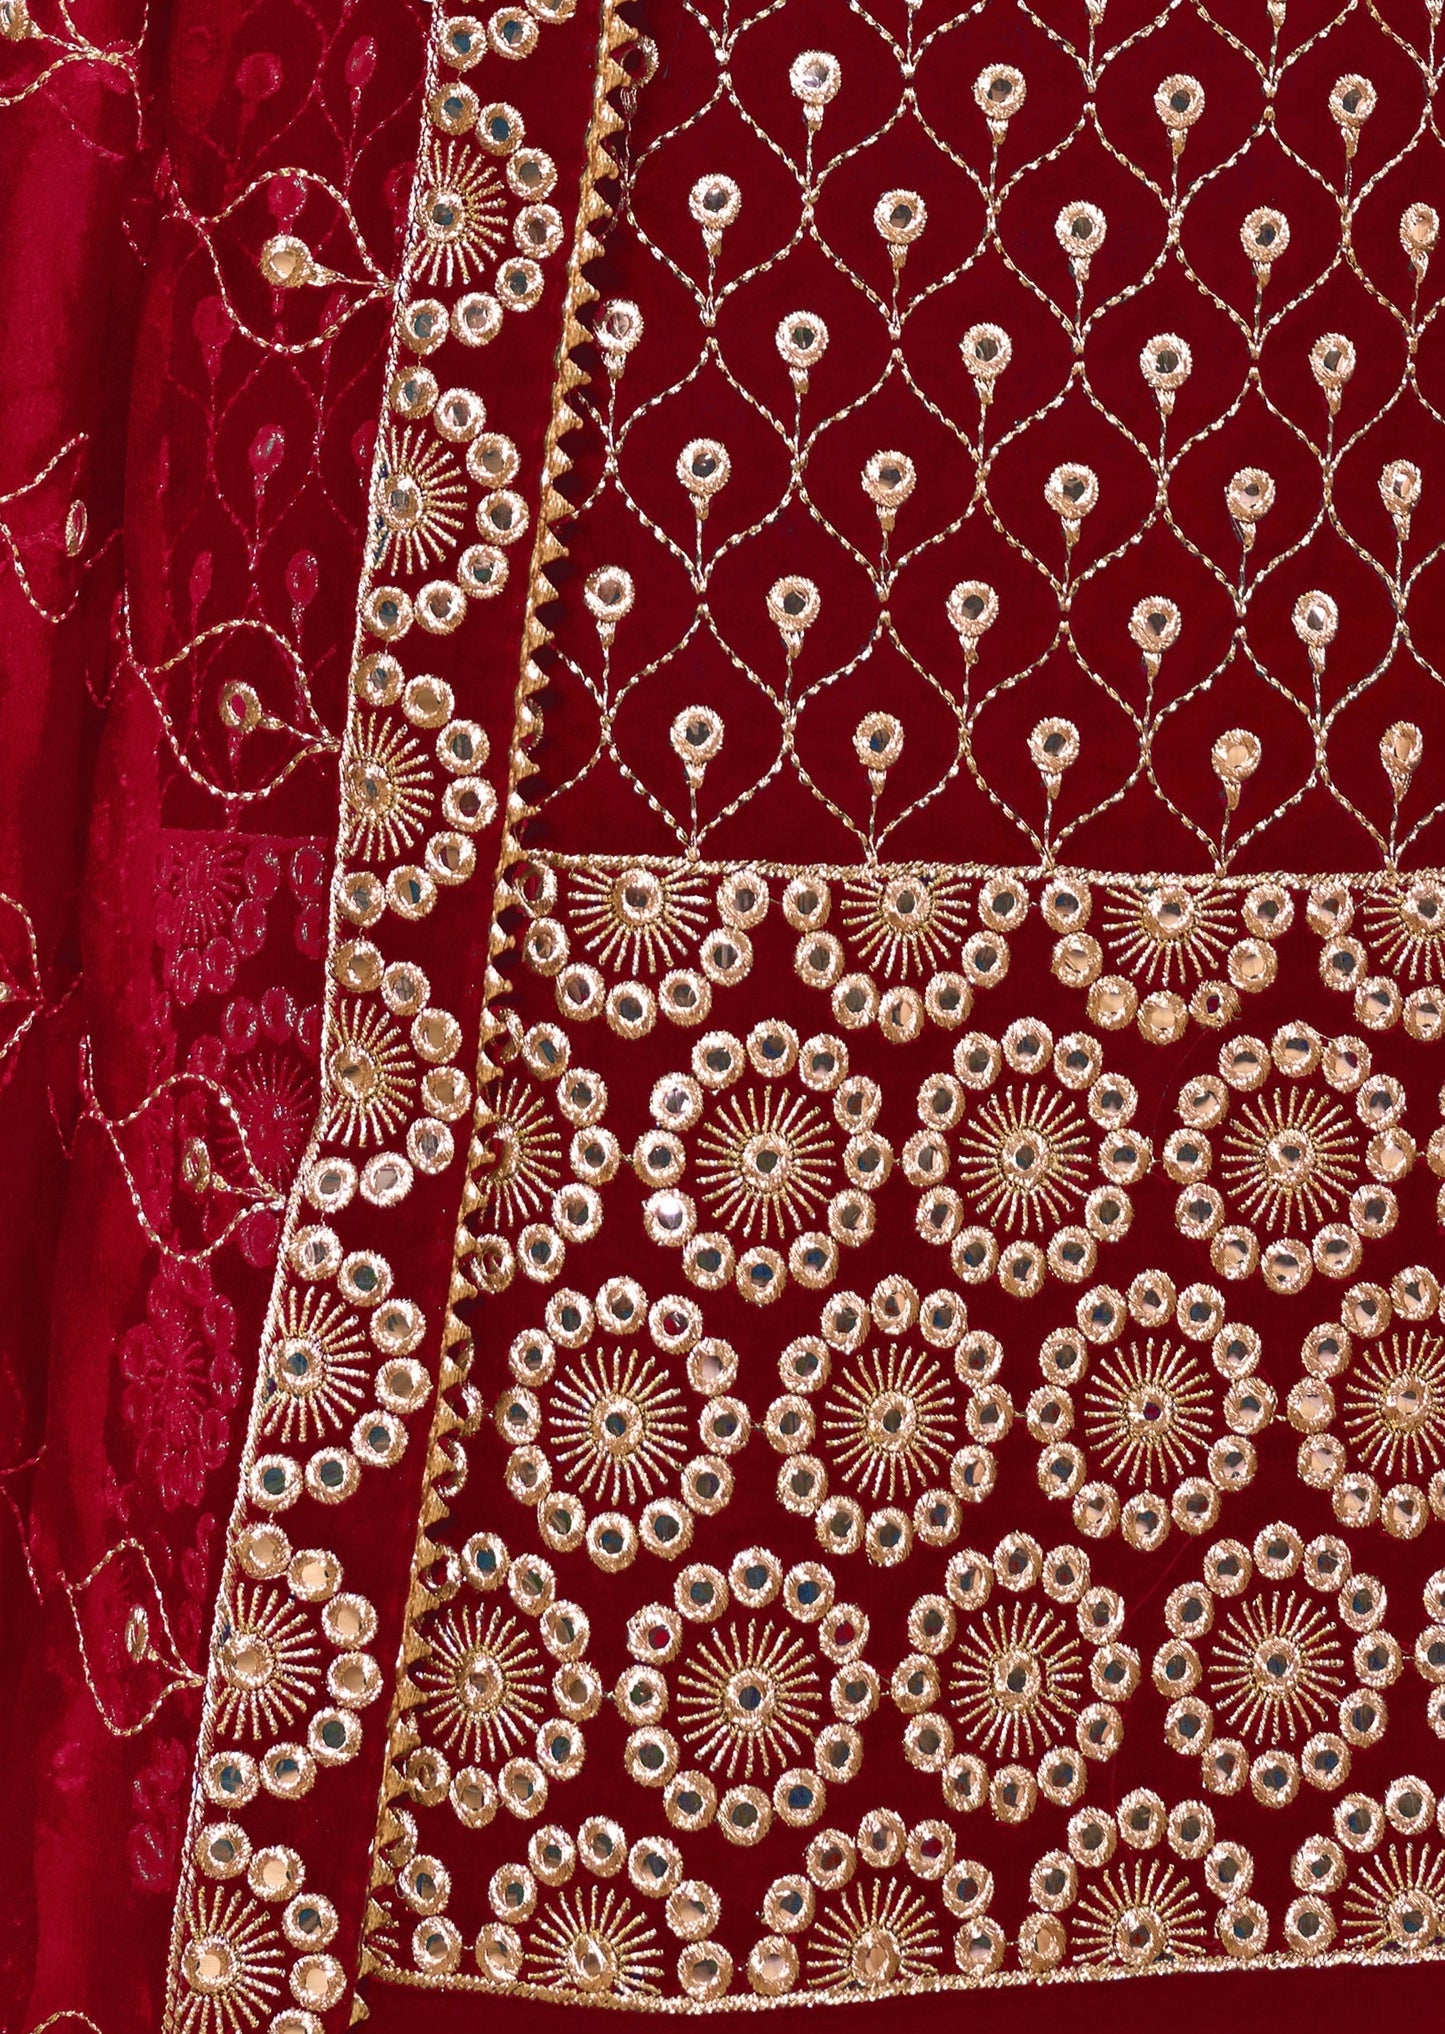 Red Georgette Sharara Suit